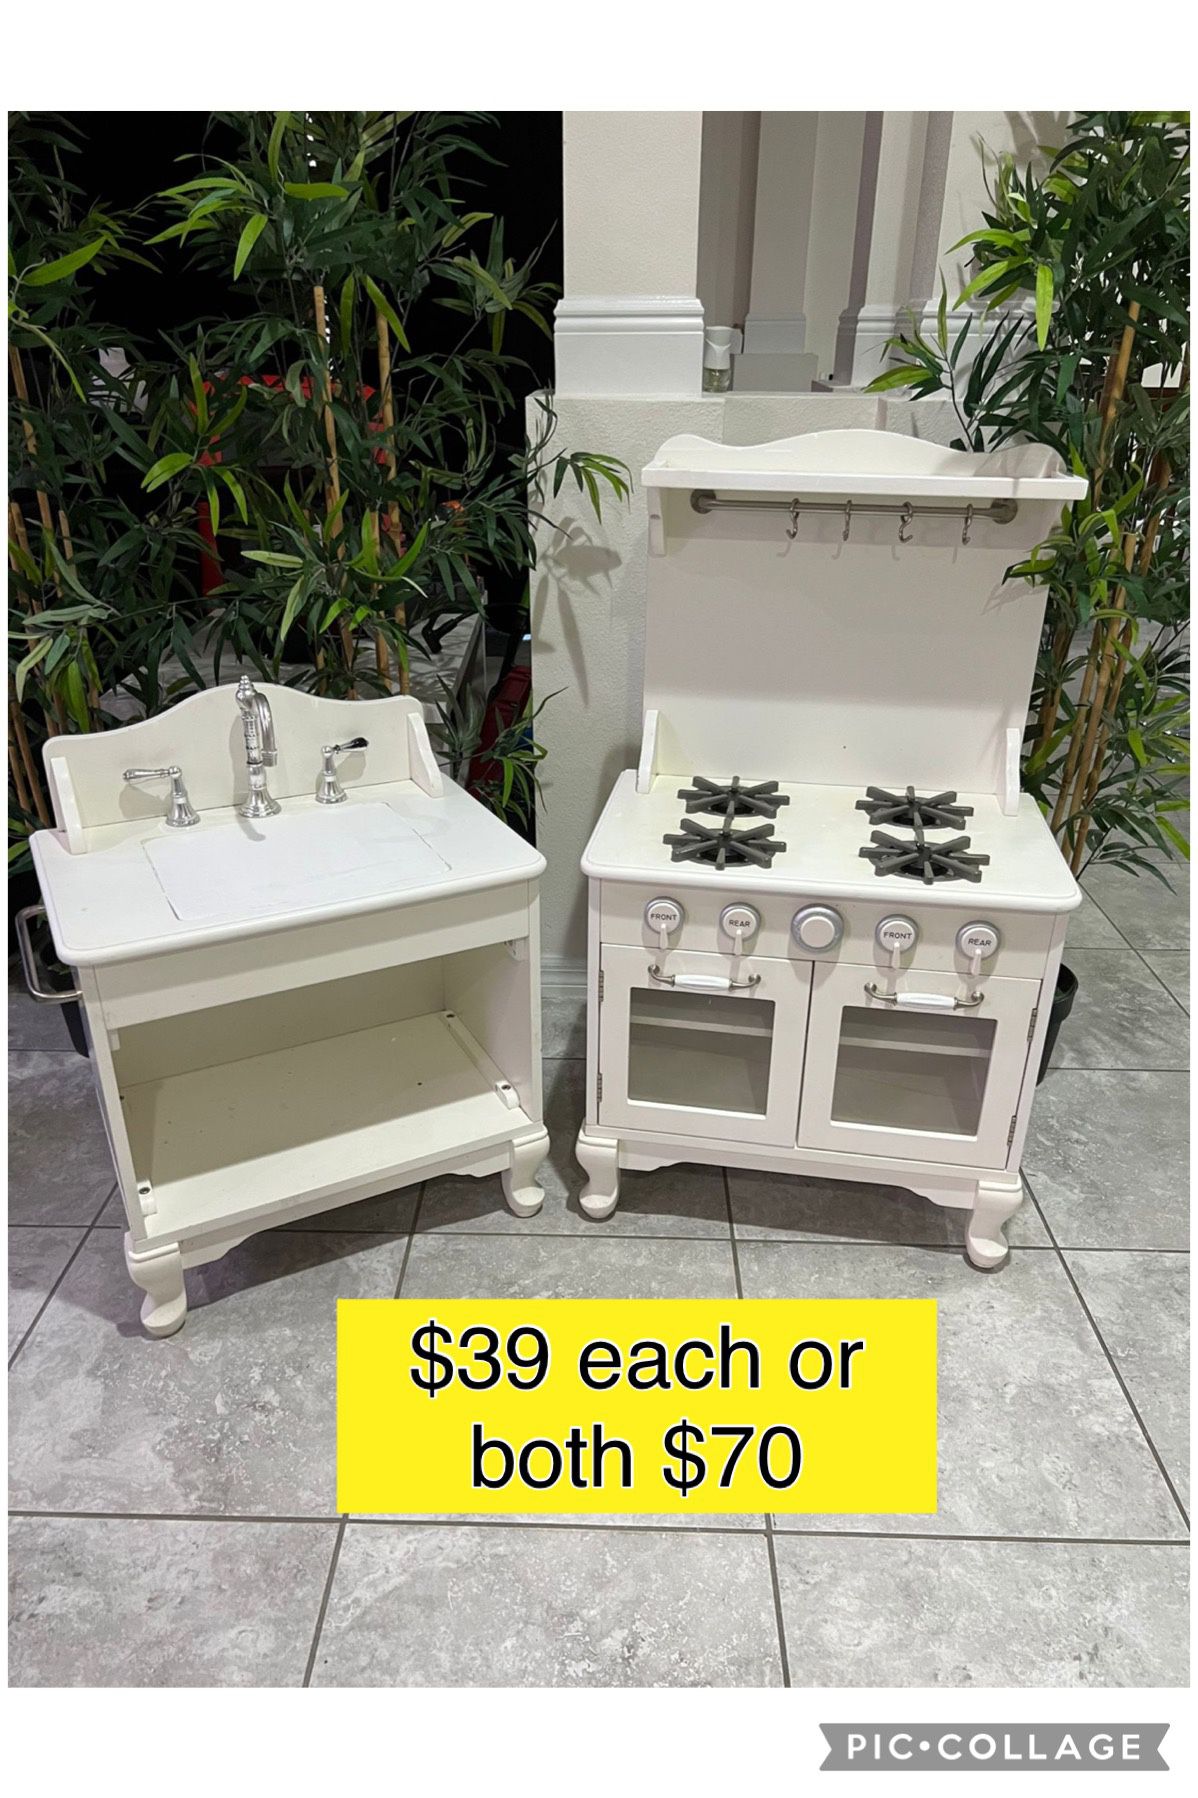 From $350 each only $39 each! Or Both $70! Kids furniture wood Pottery Barn toy Farmhouse Kitchen Sink and range ( stove) / Juguete niños cocina lavab